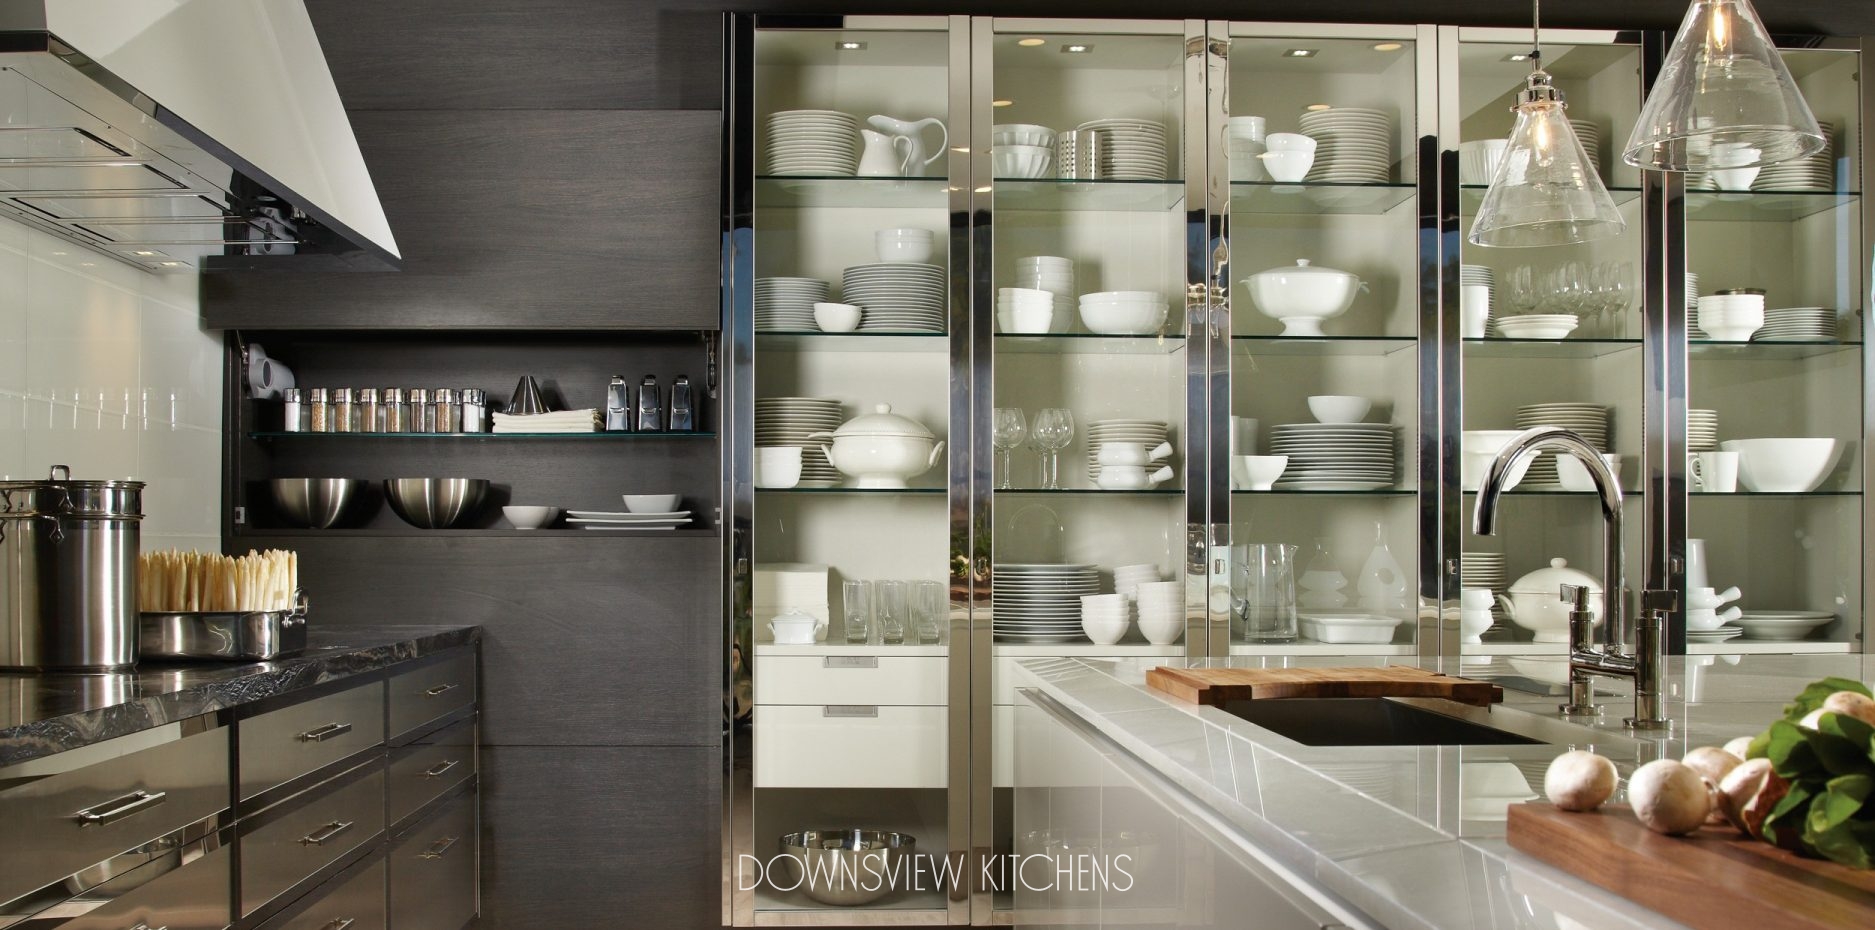 Modern Reflections Downsview Kitchens